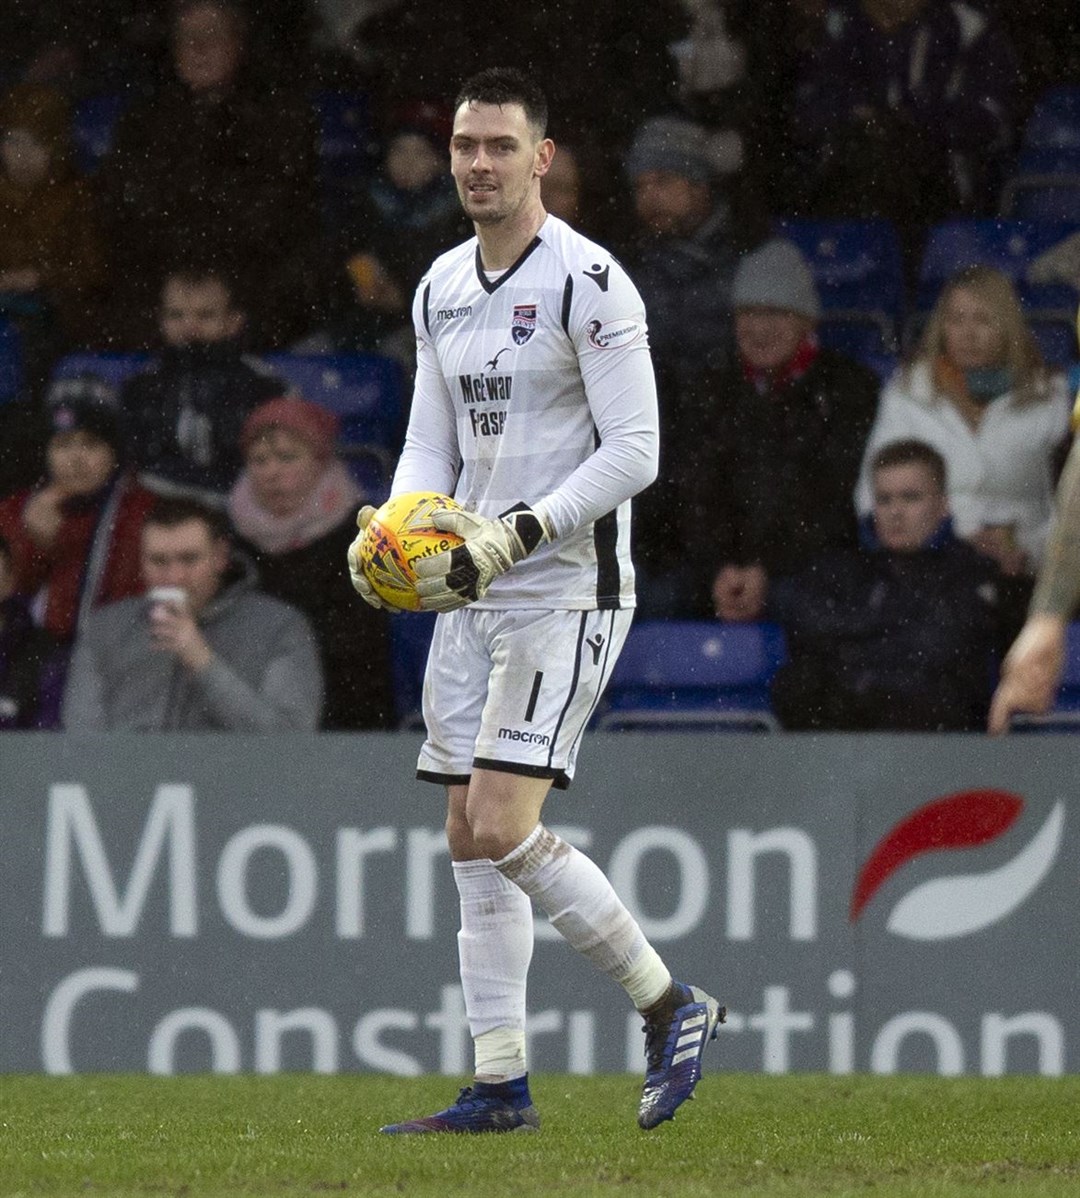 Picture - Ken Macpherson, Inverness. Ross County(1) v St.Johnstone(1).15.02.20. Ross County 'keeper Ross Laidlaw.